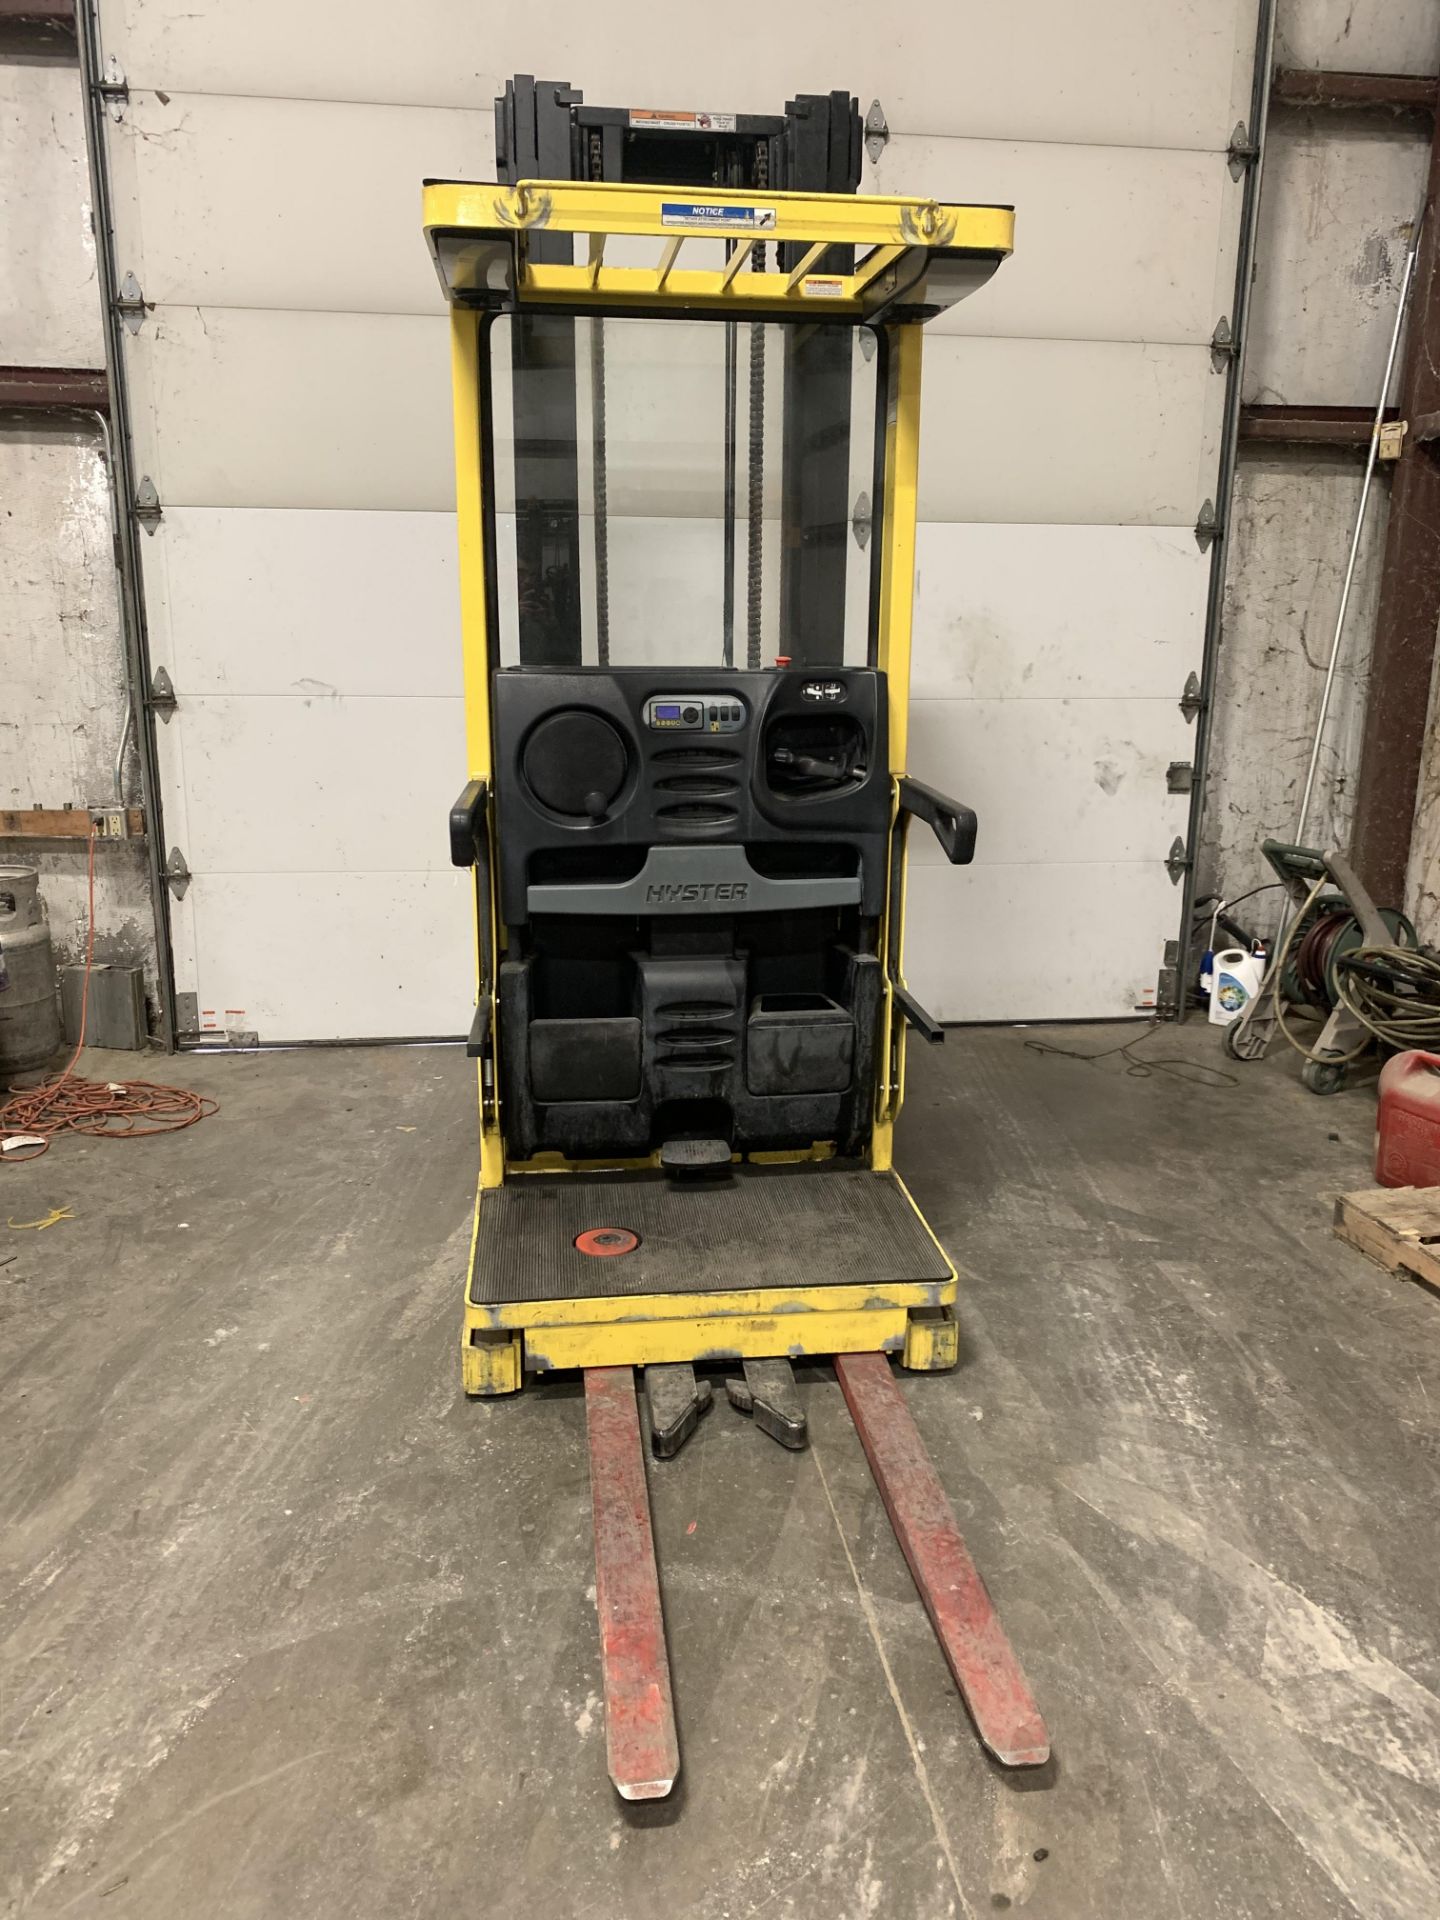 *LOCATED HAMILTON, OH* 2015 HYSTER 3,000-LB. CAP ORDER PICKER, MODEL: R30XM3, 36V, 240" LIFT HEIGHT - Image 3 of 4